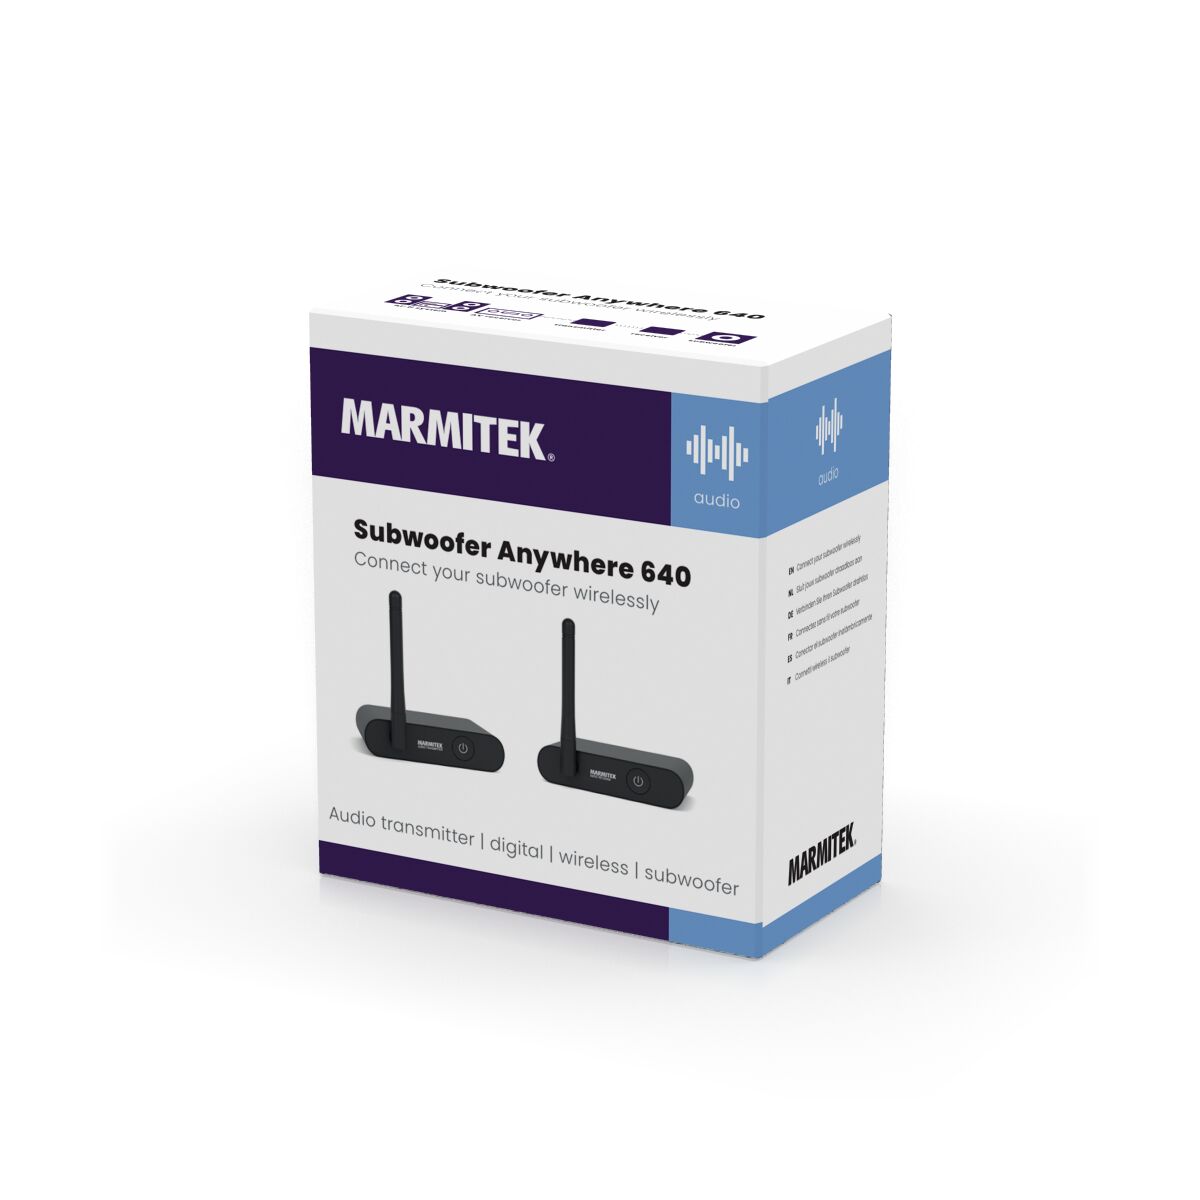 Subwoofer Anywhere 640 - Wireless Autio Transmitter and Receiver for Subwoofer - 3D Packshot Image | Marmitek